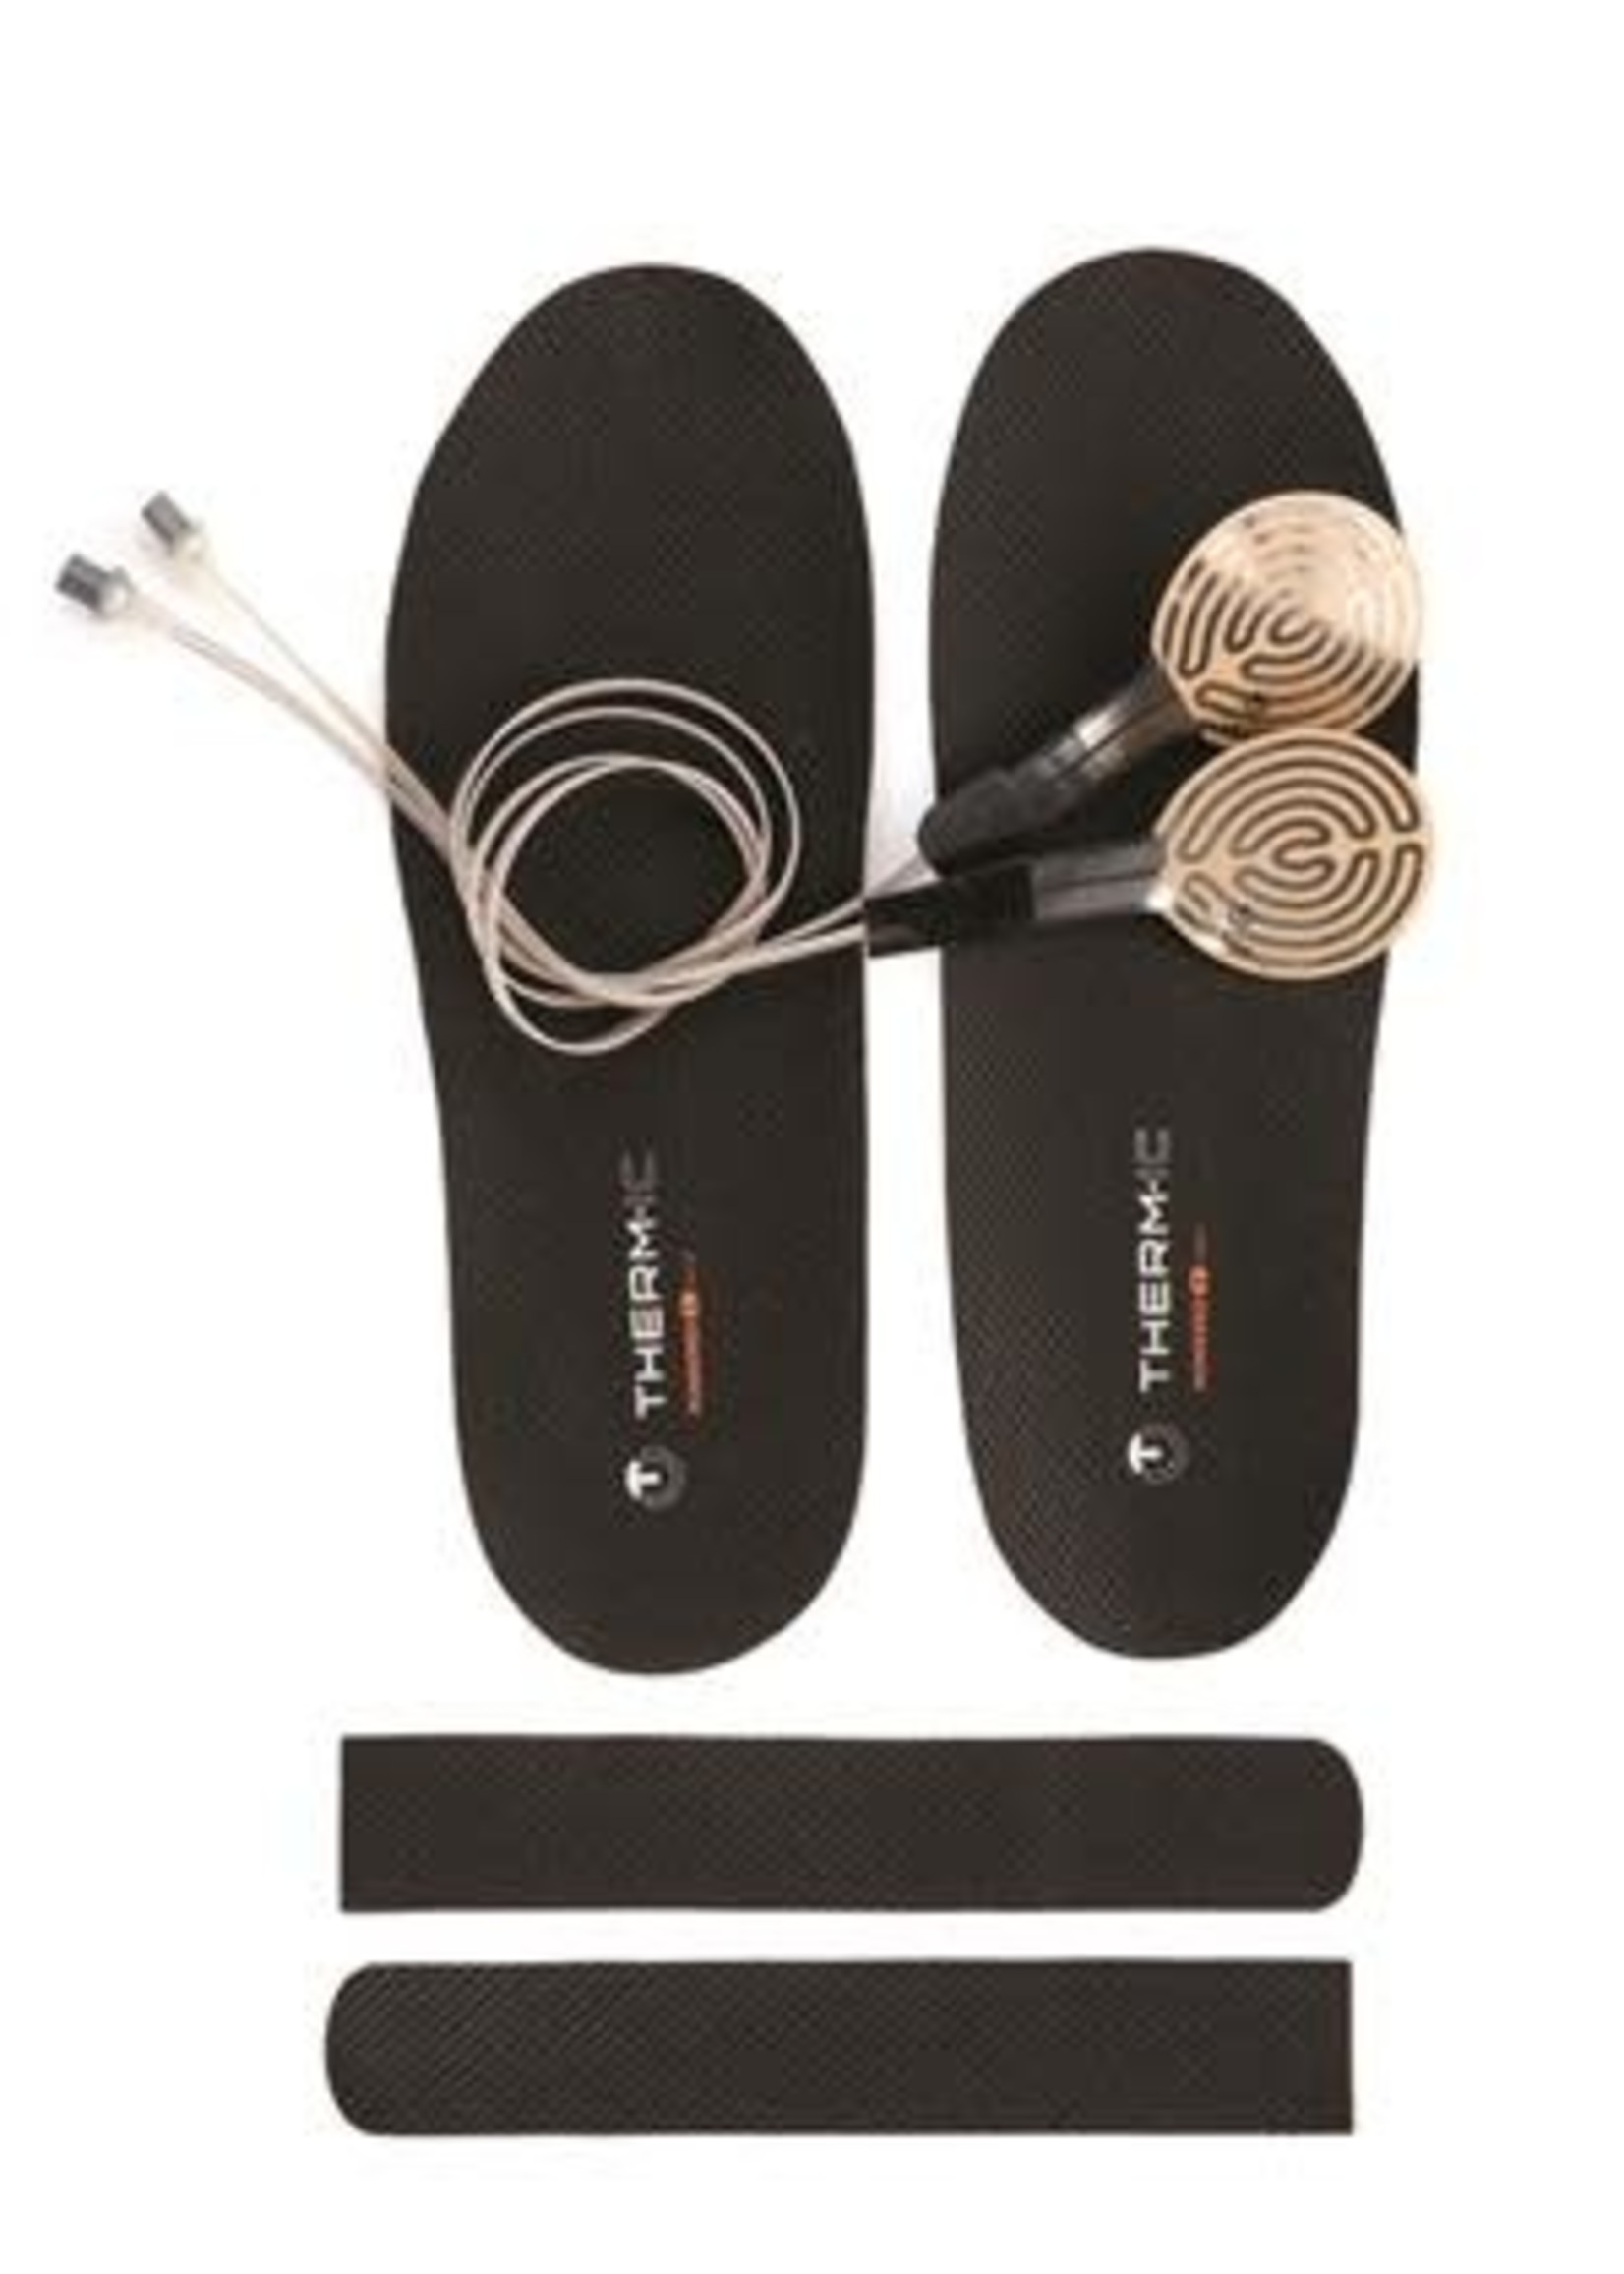 THERMIC THERMIC HEAT KIT FOR INSOLES